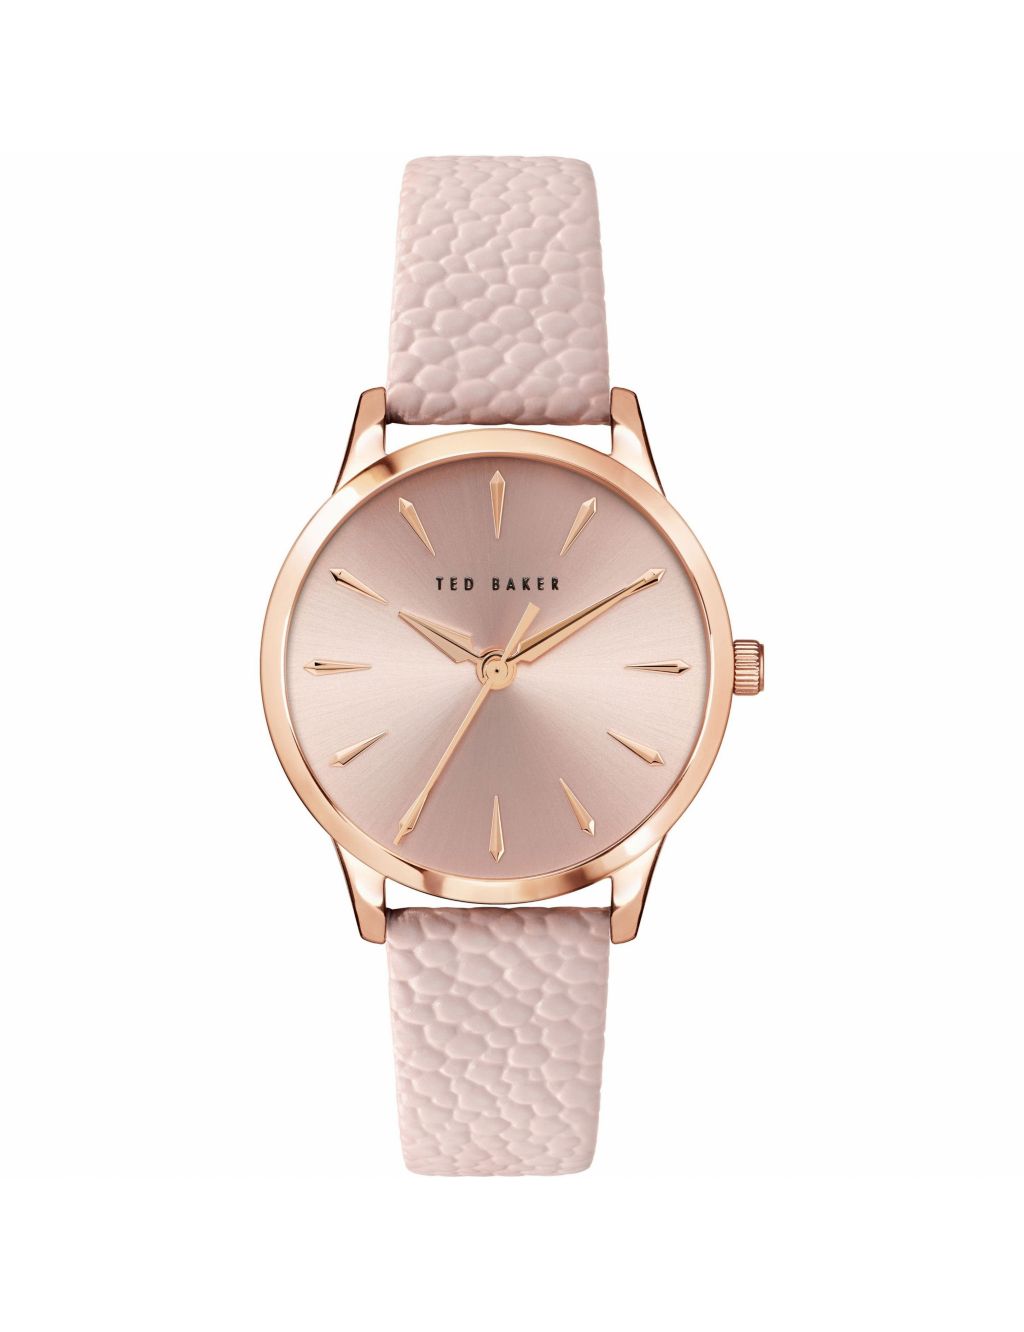 Ted Baker Fitzrovia Charm Pink Leather Watch image 1